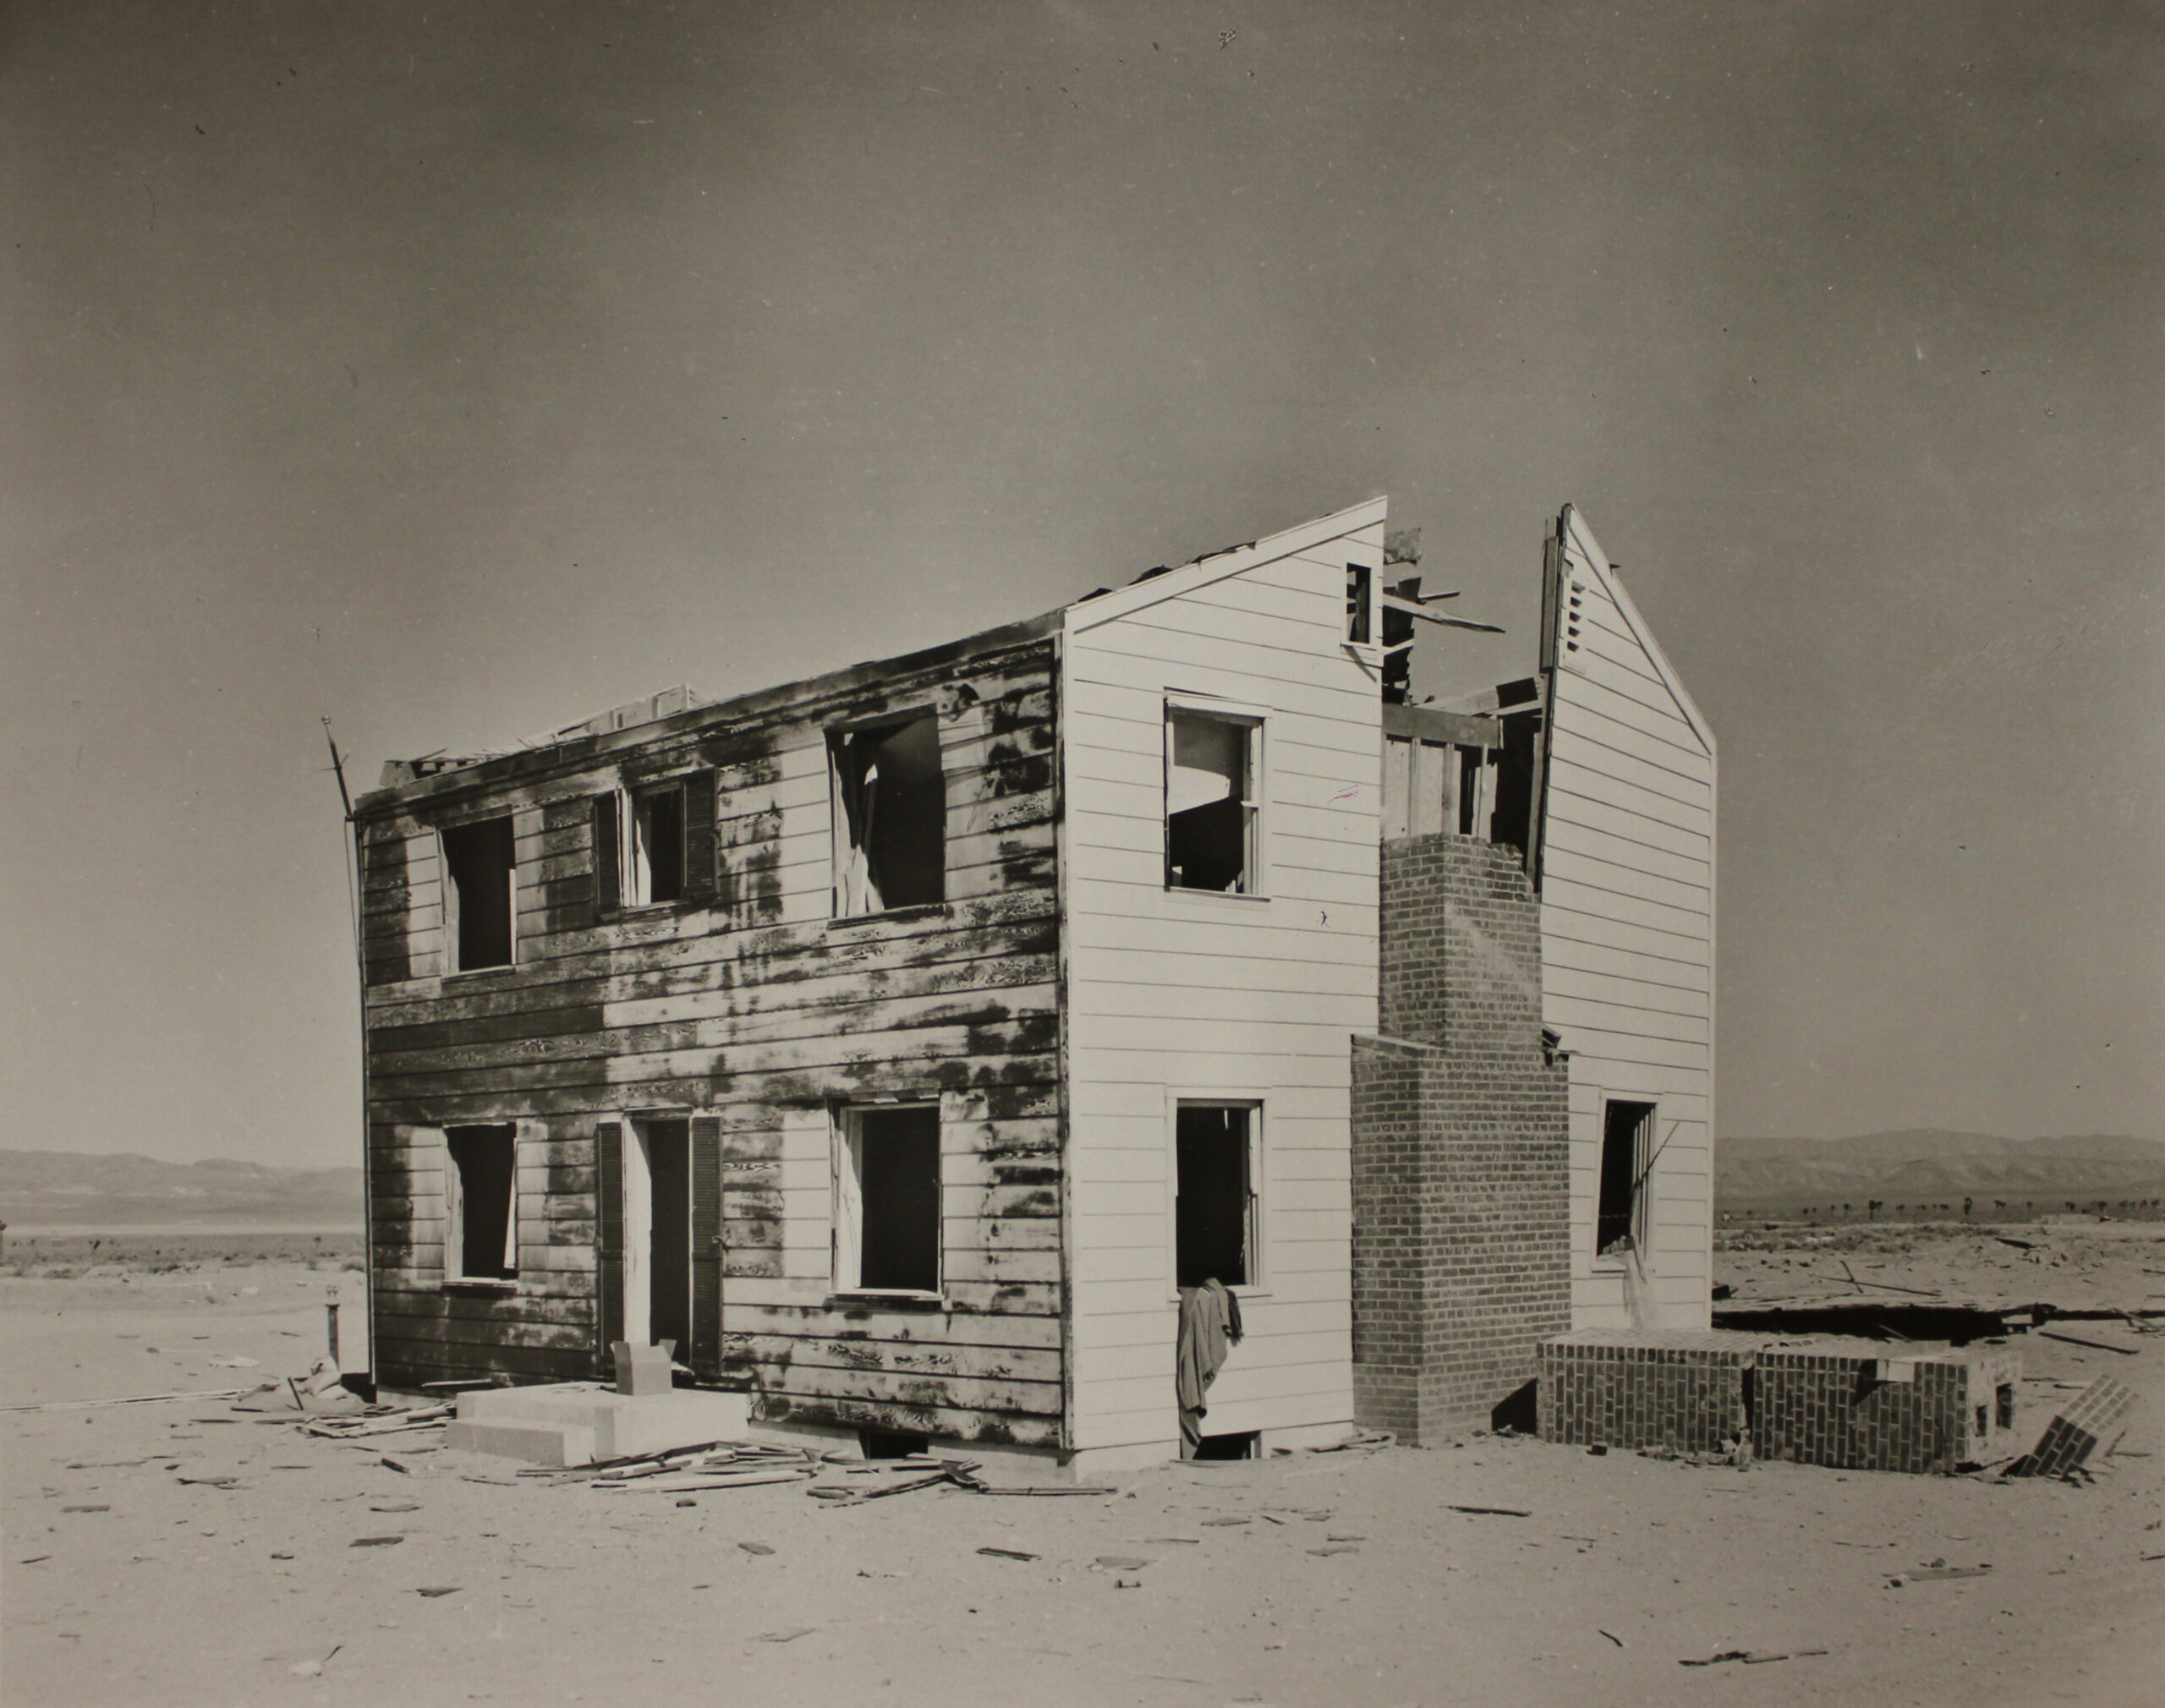 Apple-2 house after test – National Archives Identifier: 7065483